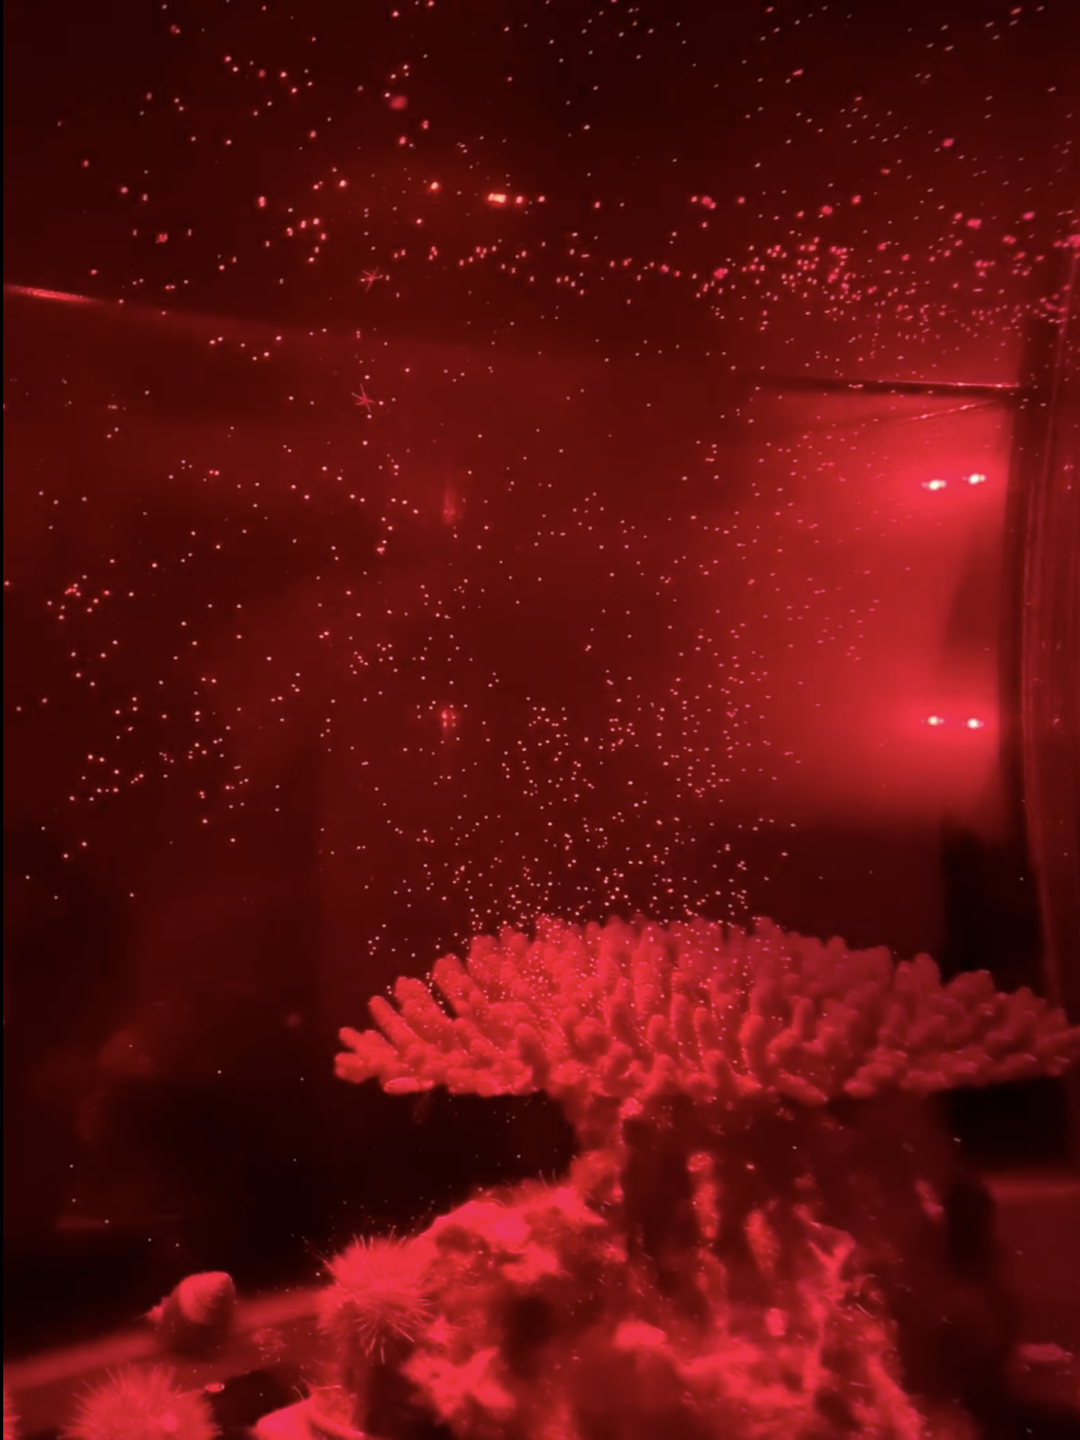 An Acropora coral releases gametes into the water column in the Academy’s Coral Regeneration Lab.